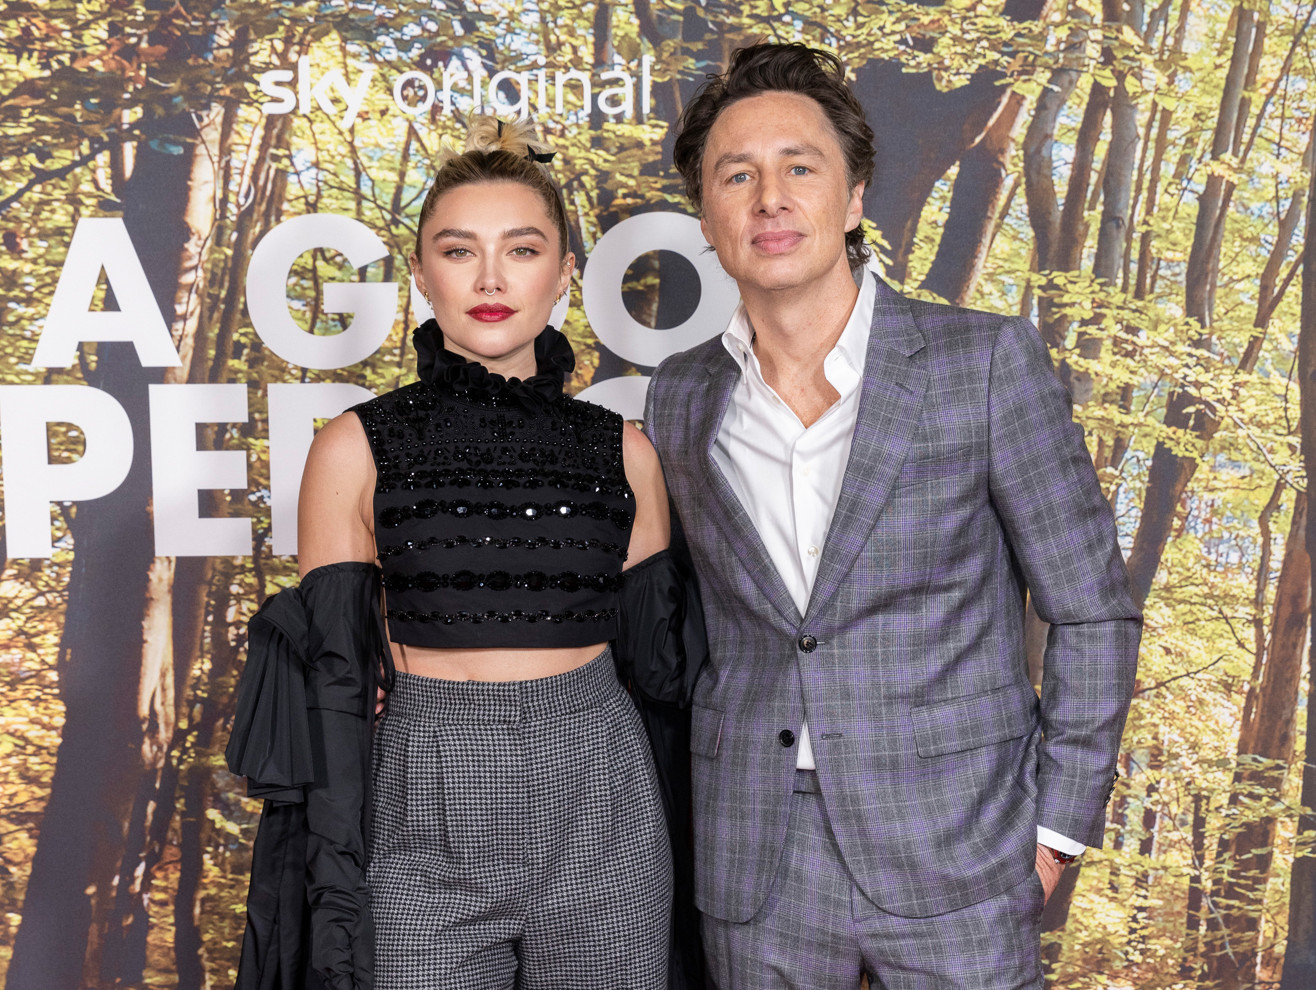 Exes Florence Pugh and Zach Braff reunited at A Good Person's UK premiere